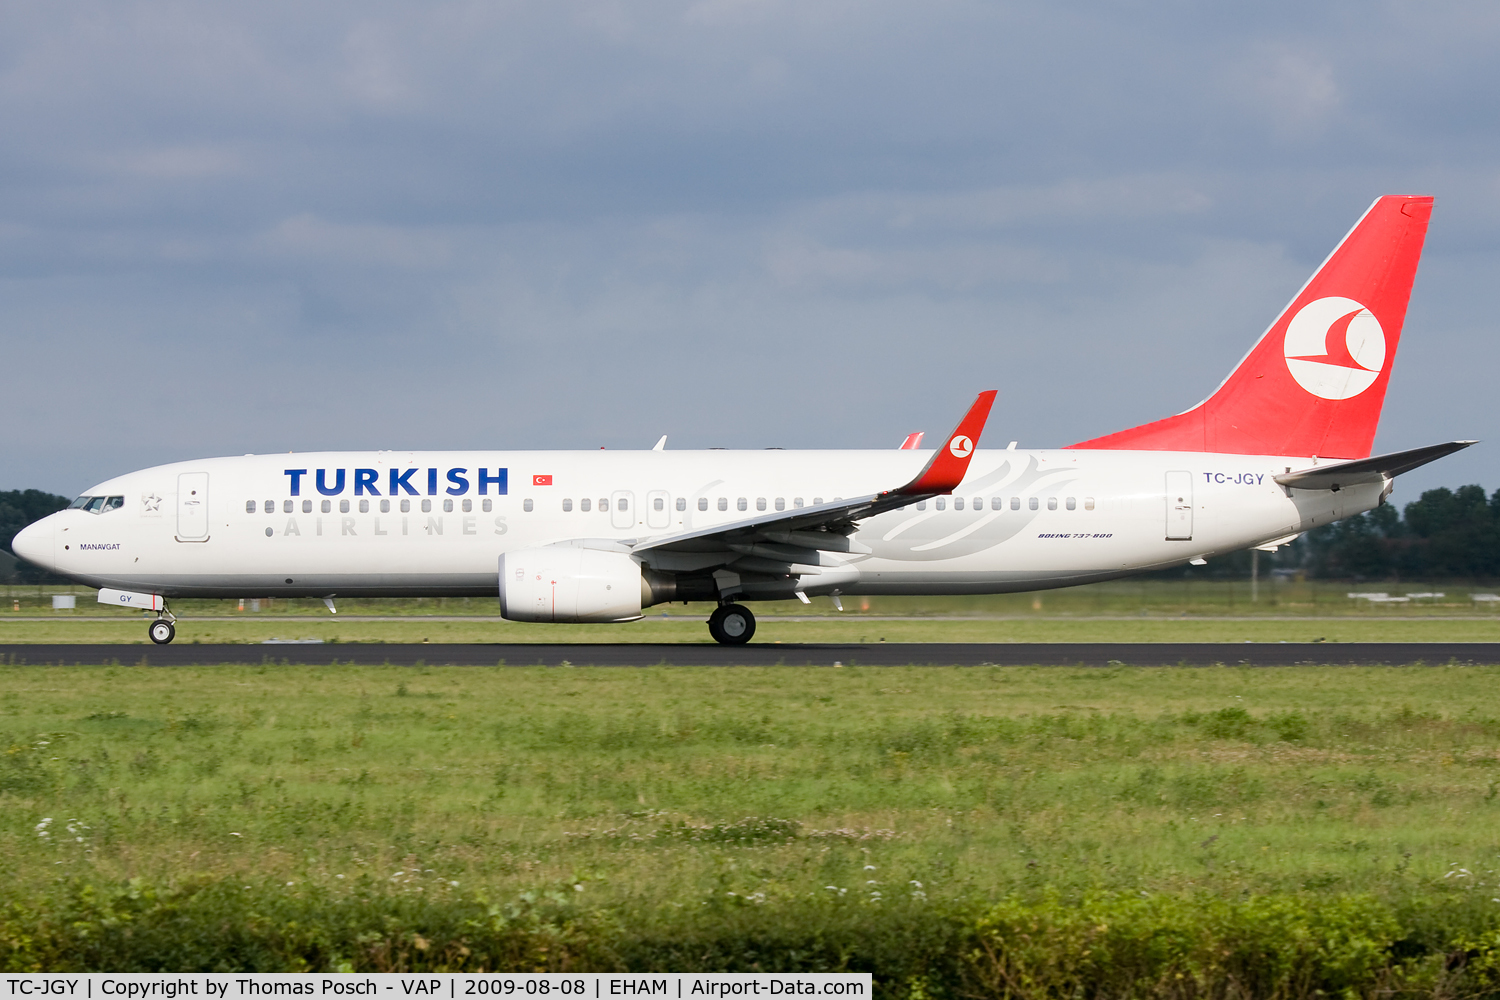 TC-JGY, 2008 Boeing 737-8F2 C/N 35738, Turkish Airlines